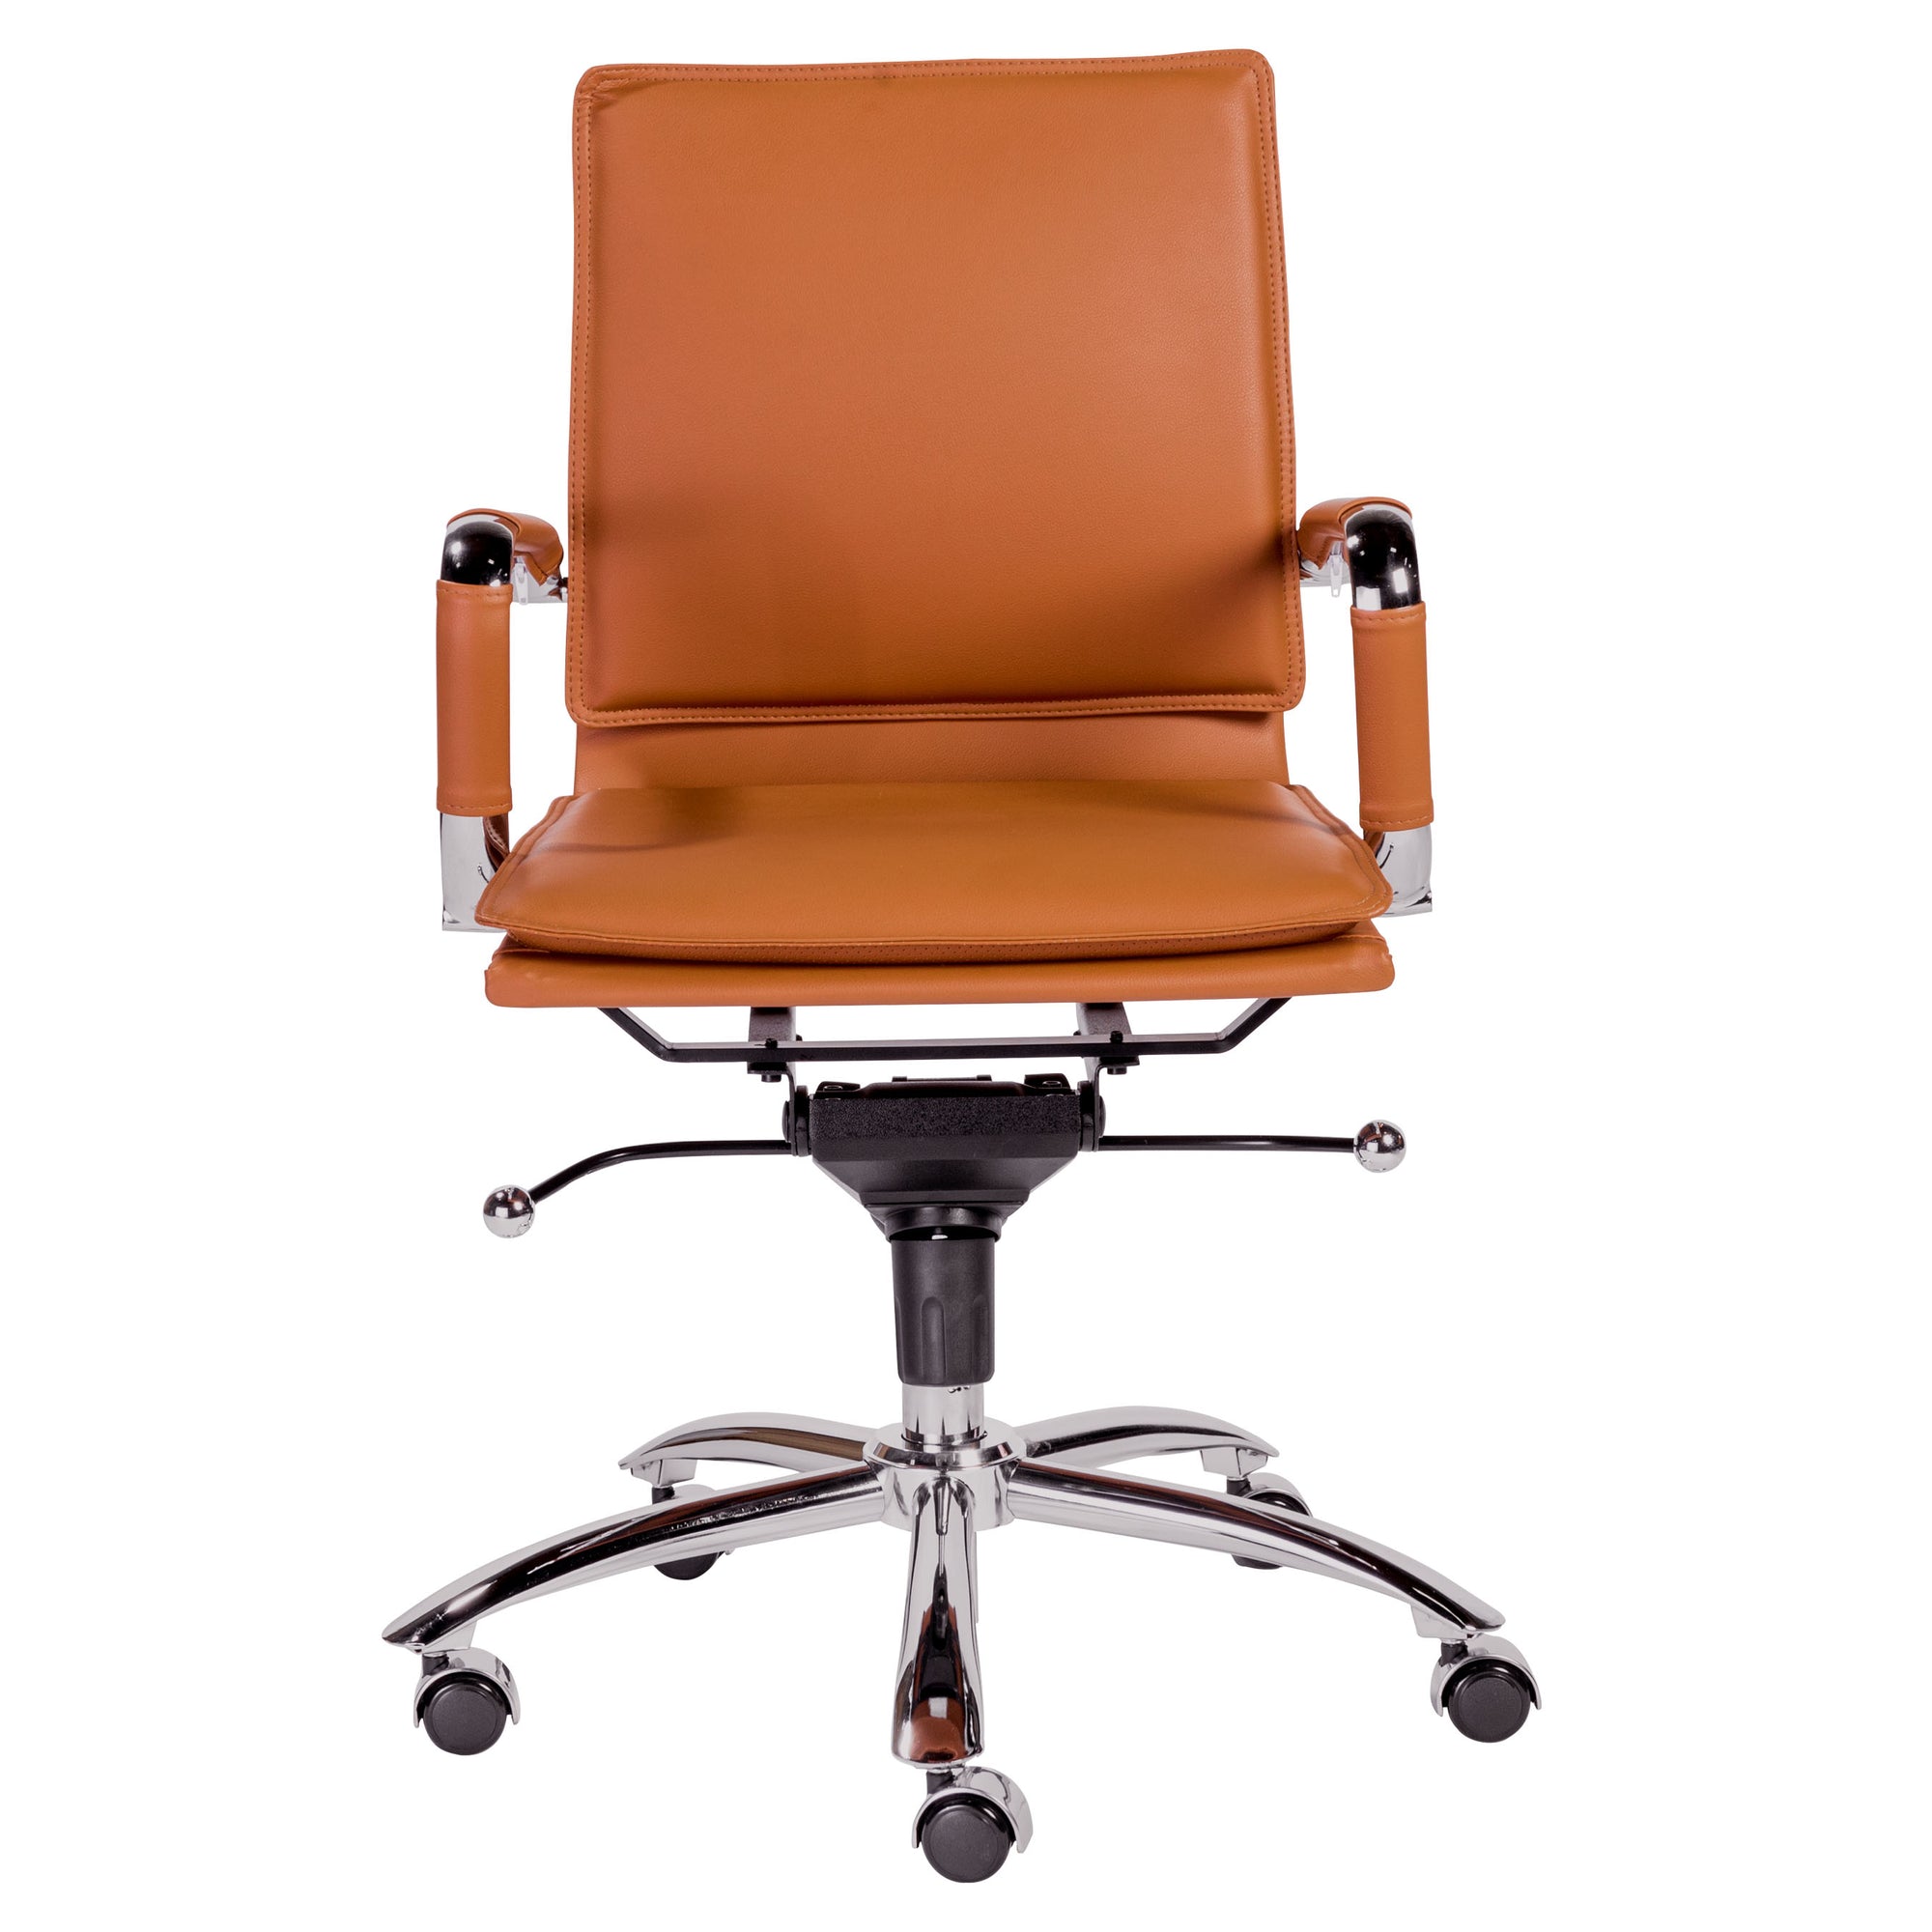 Cognac Leatherette Desk Chair With Low Back By Euro Style Officedesk Com